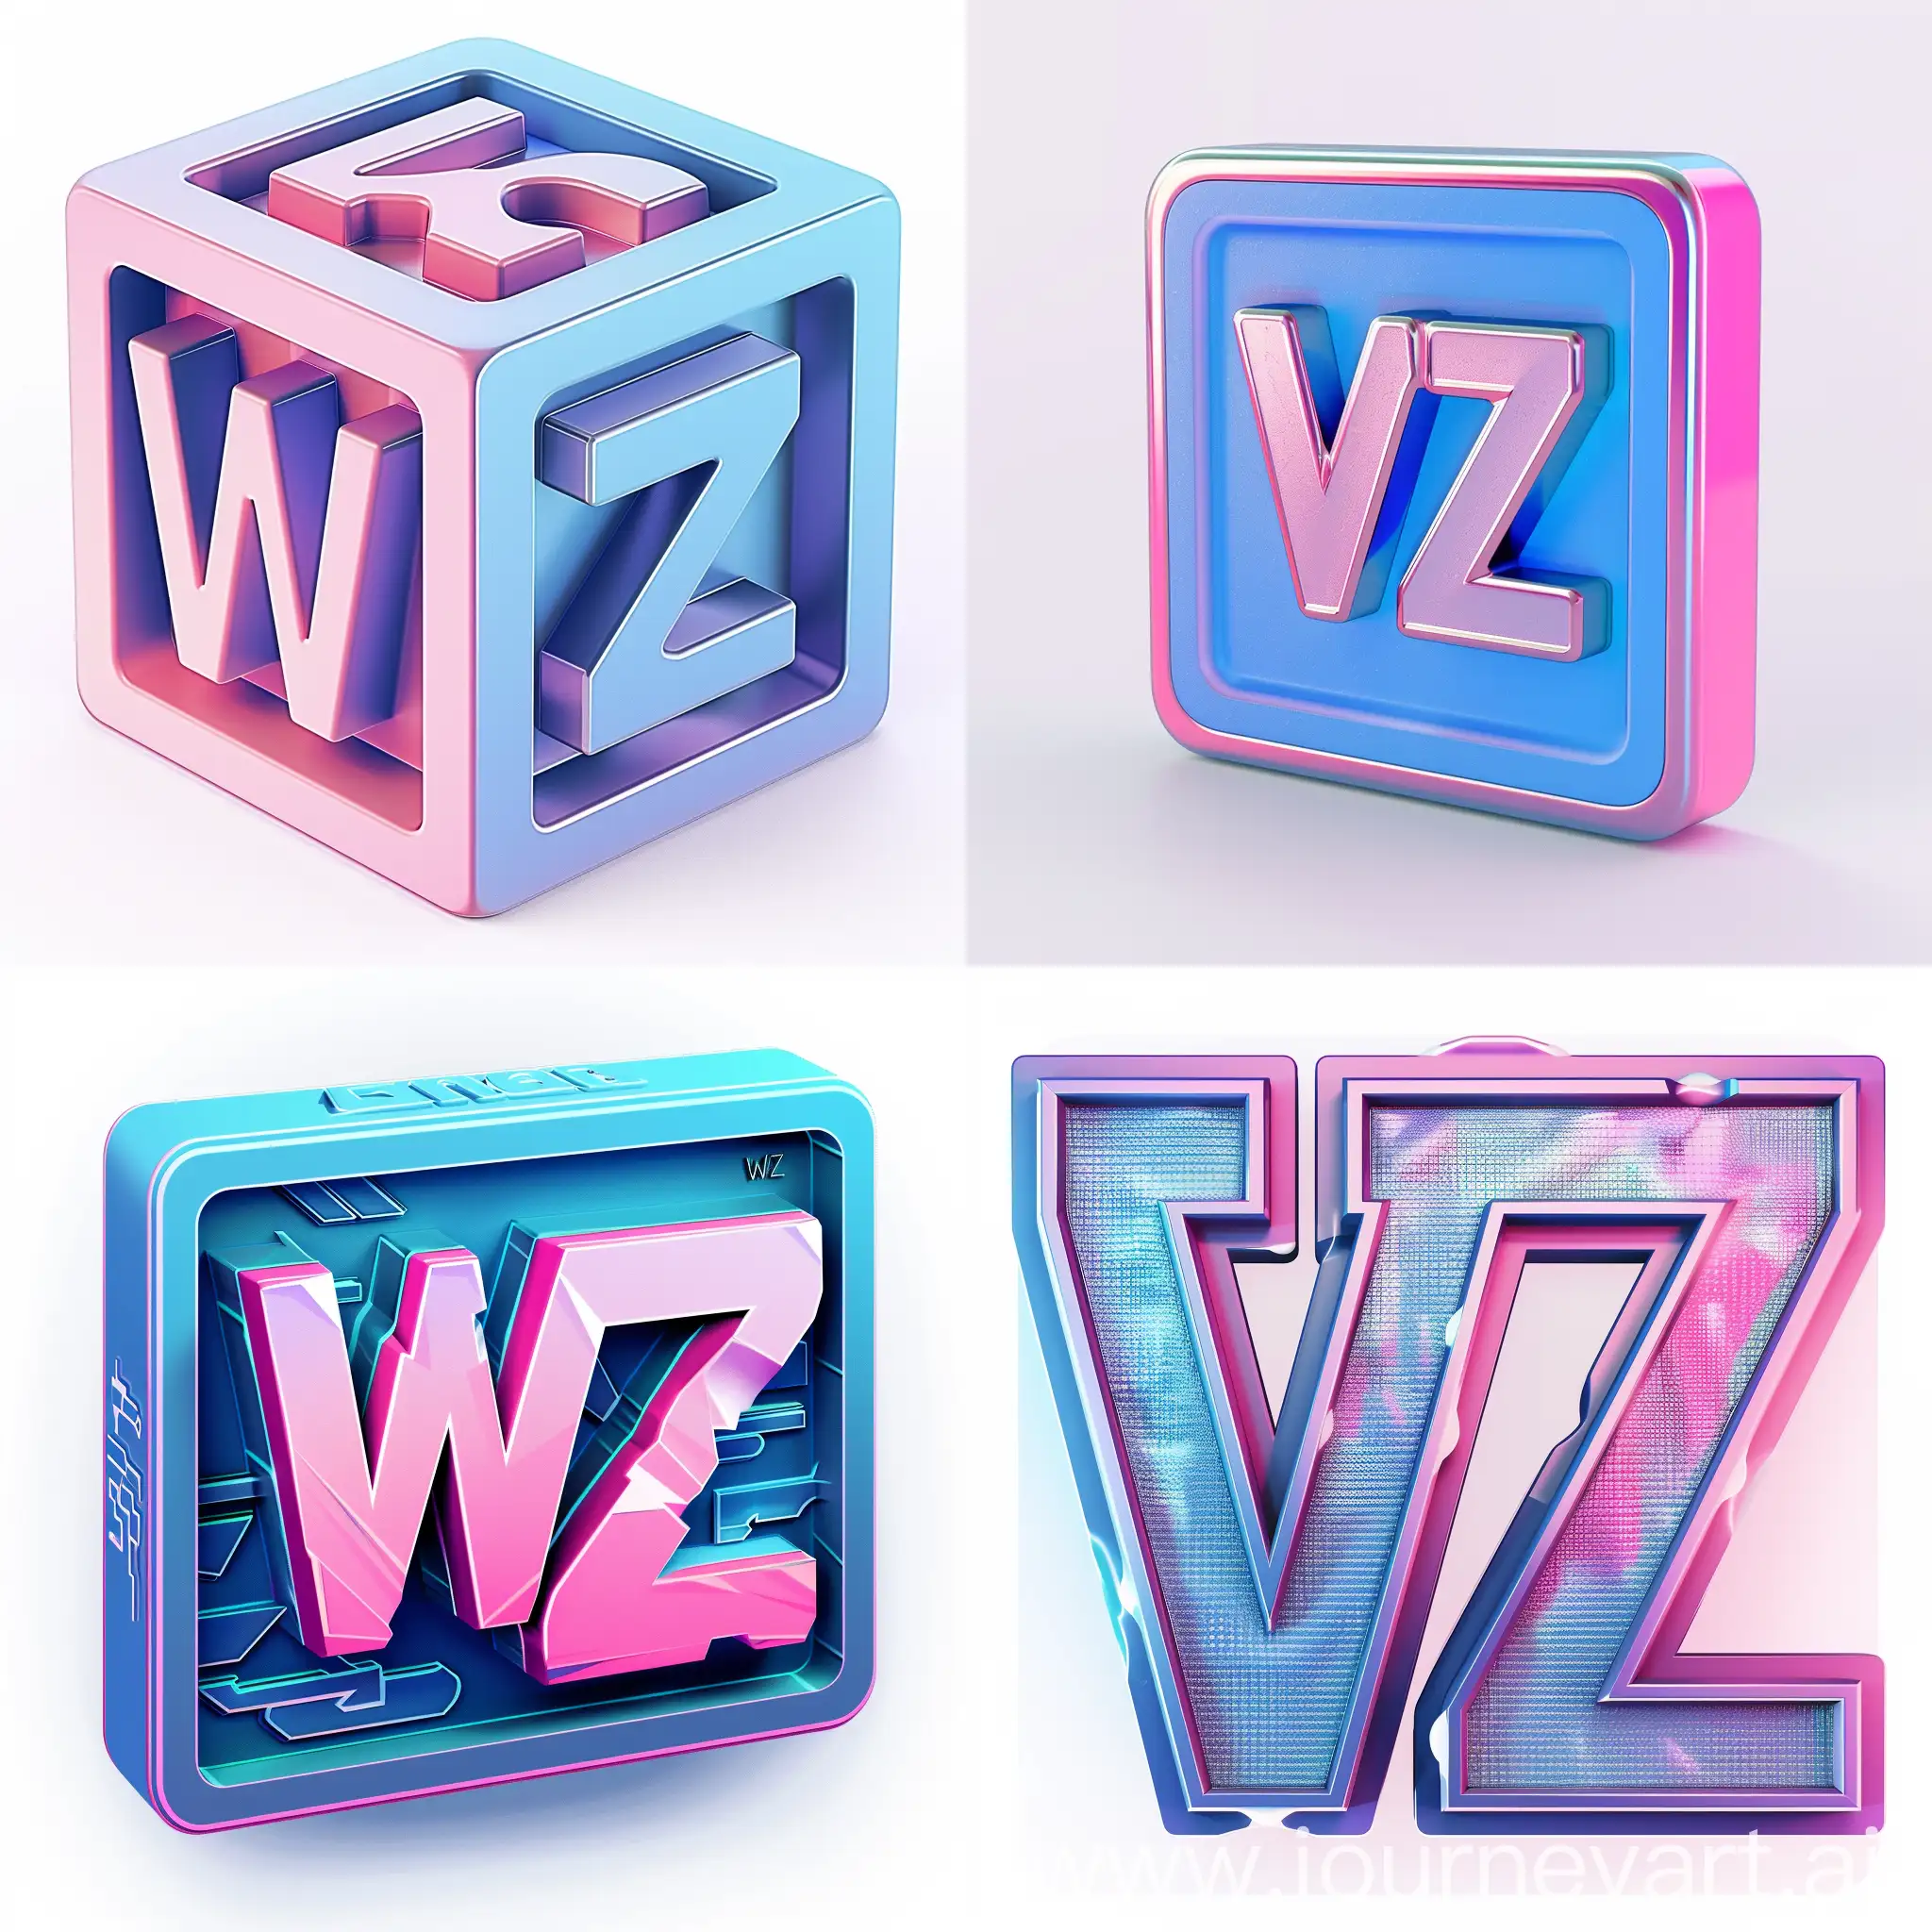 Colorful-Discord-Shop-Server-Icon-with-Customized-Letters-WZ